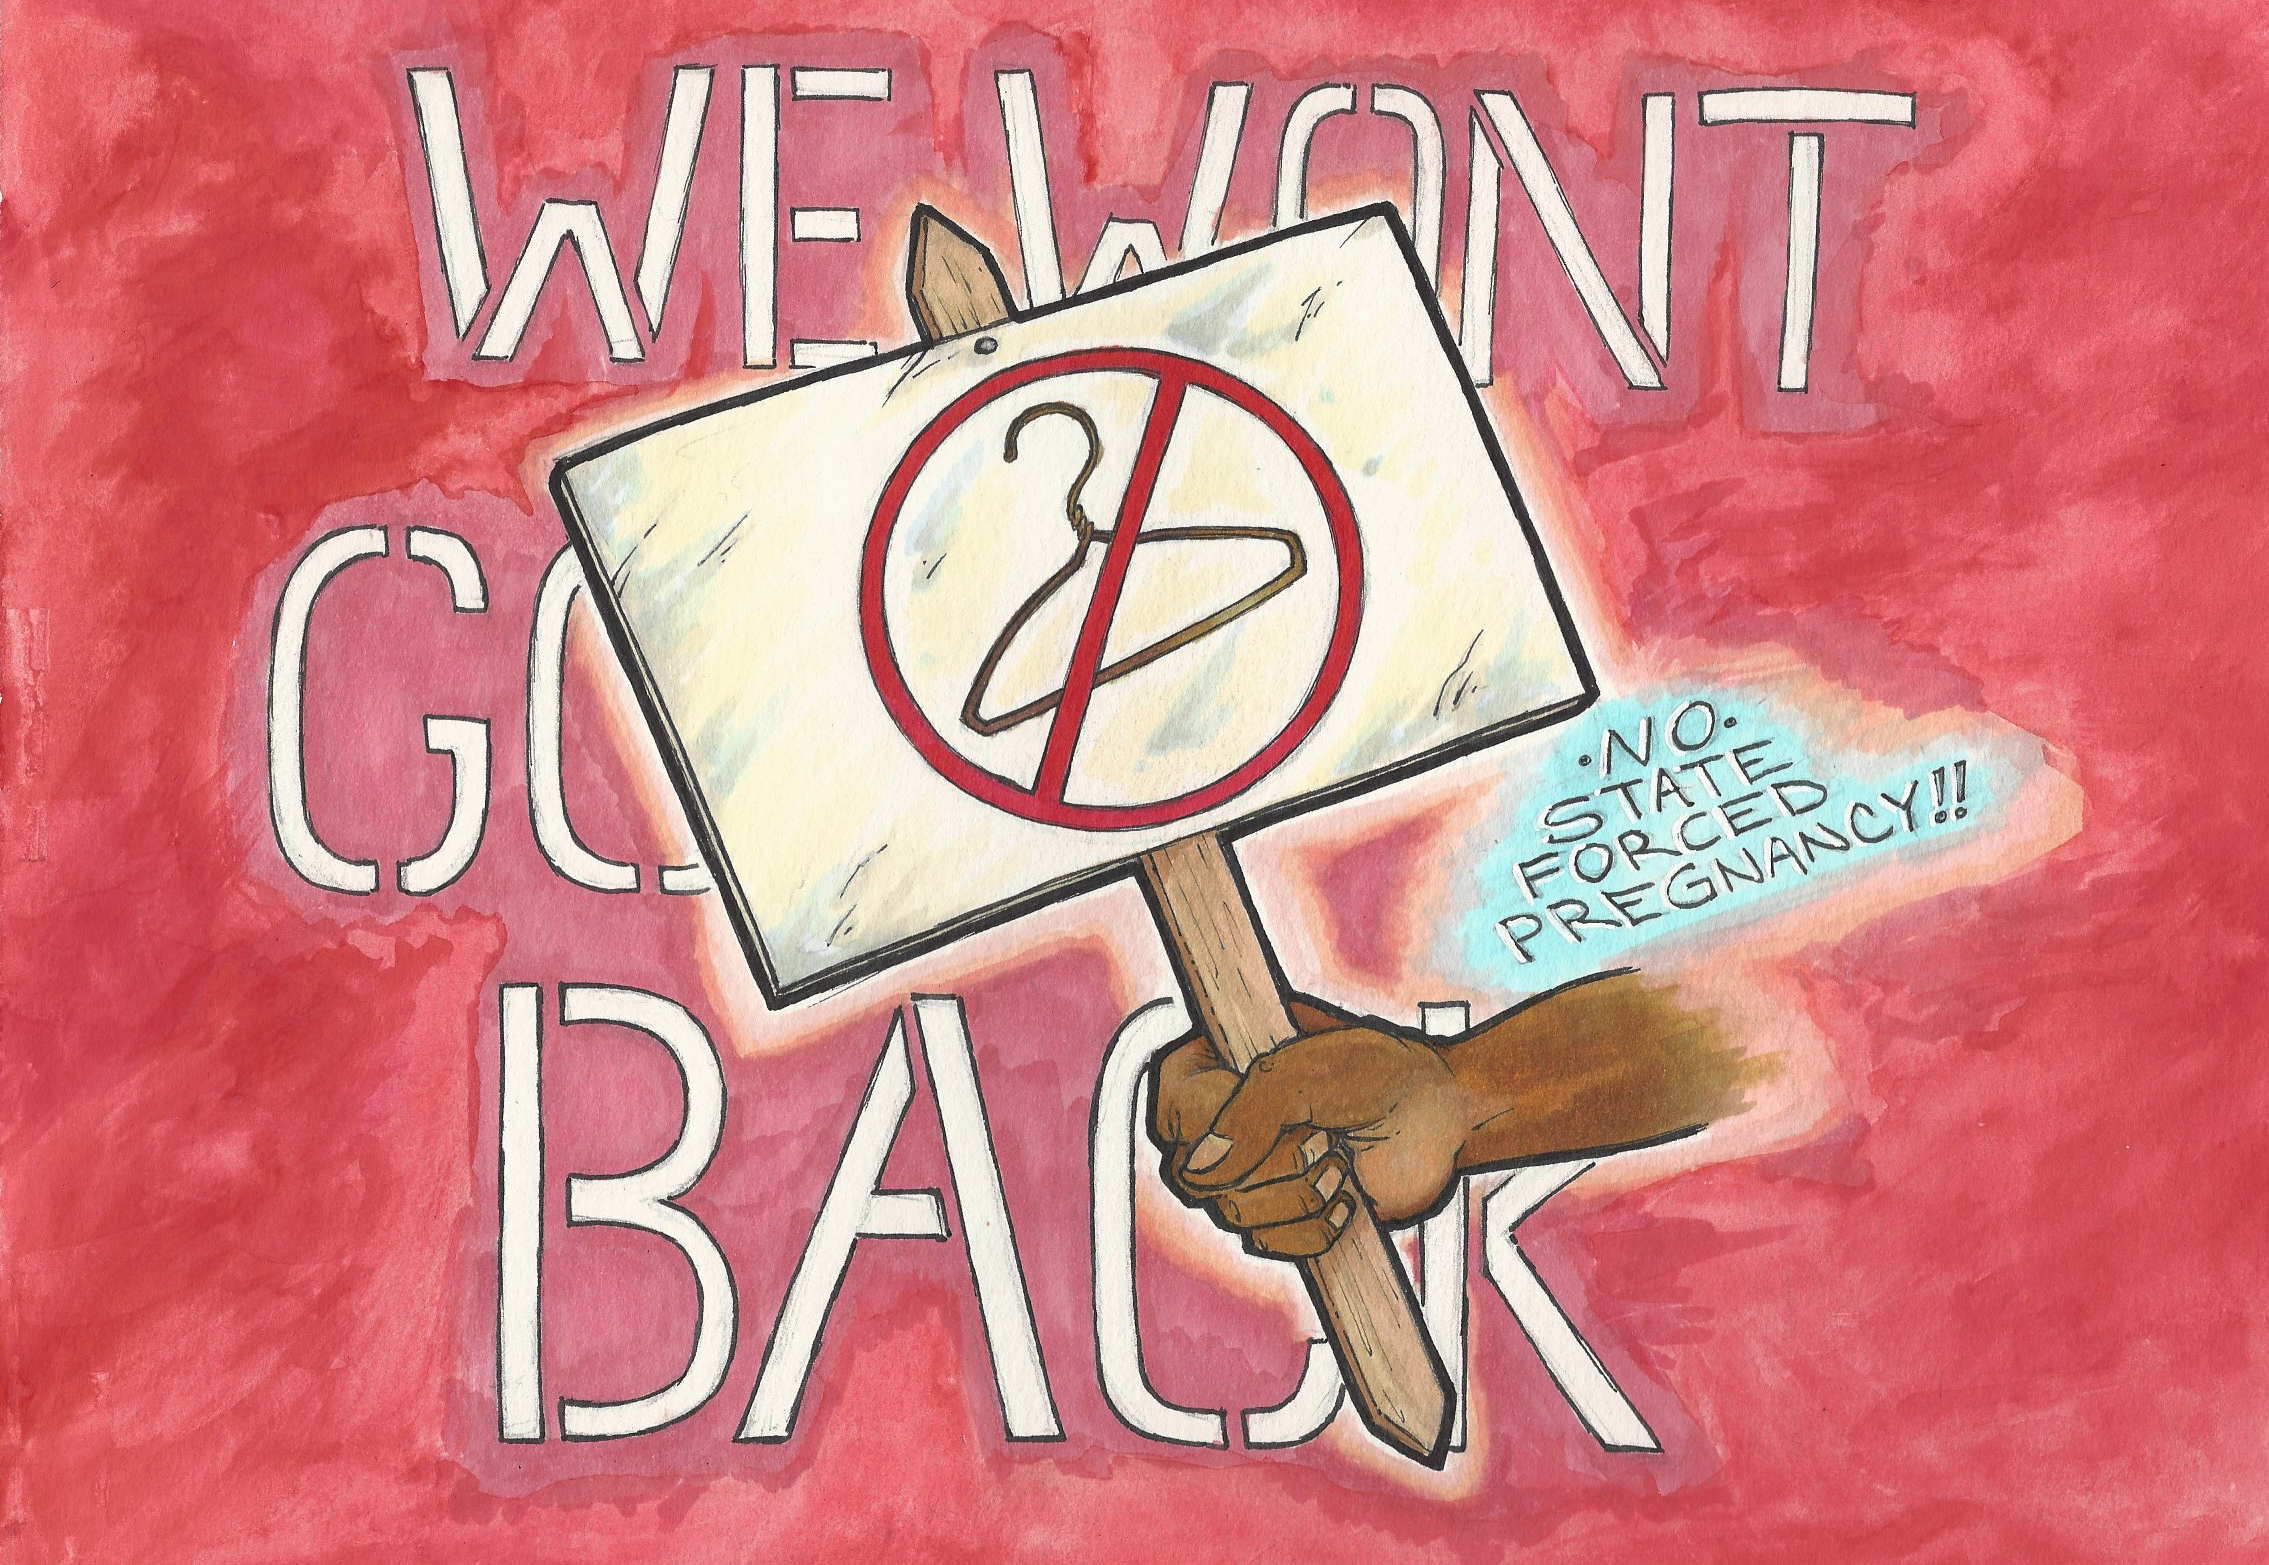 Against a red background the words "We won't go Back" appear. In the foreground a hand holds up a sign picturing a coat hanger with a line through it. A smaller text bubble appears to the side that says "NO state forced pregnancy!!"